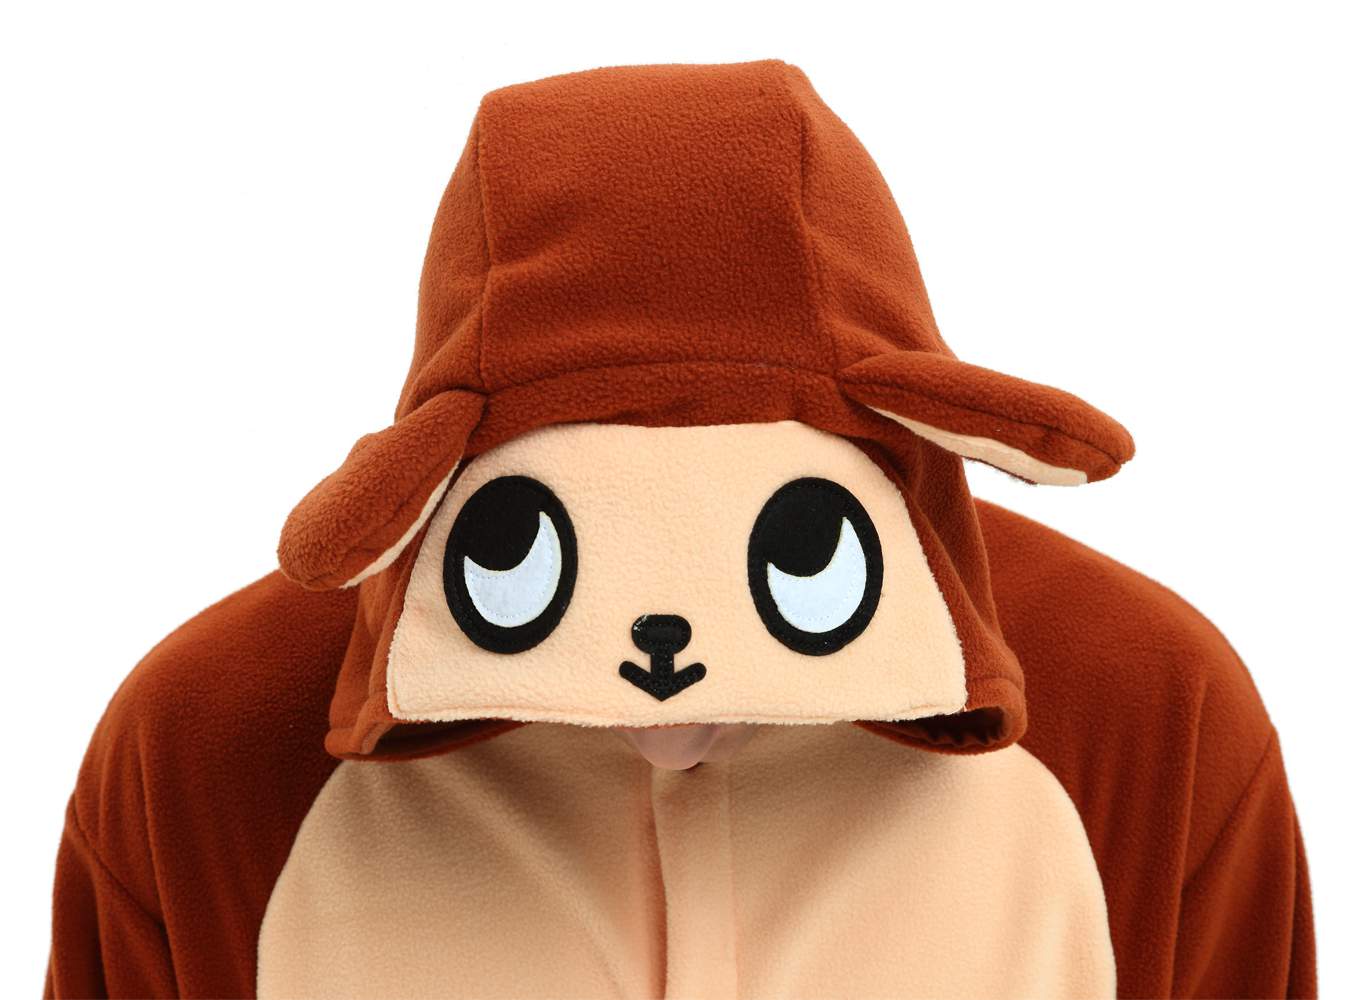 Monkey Onesie For Adults and Teenagers